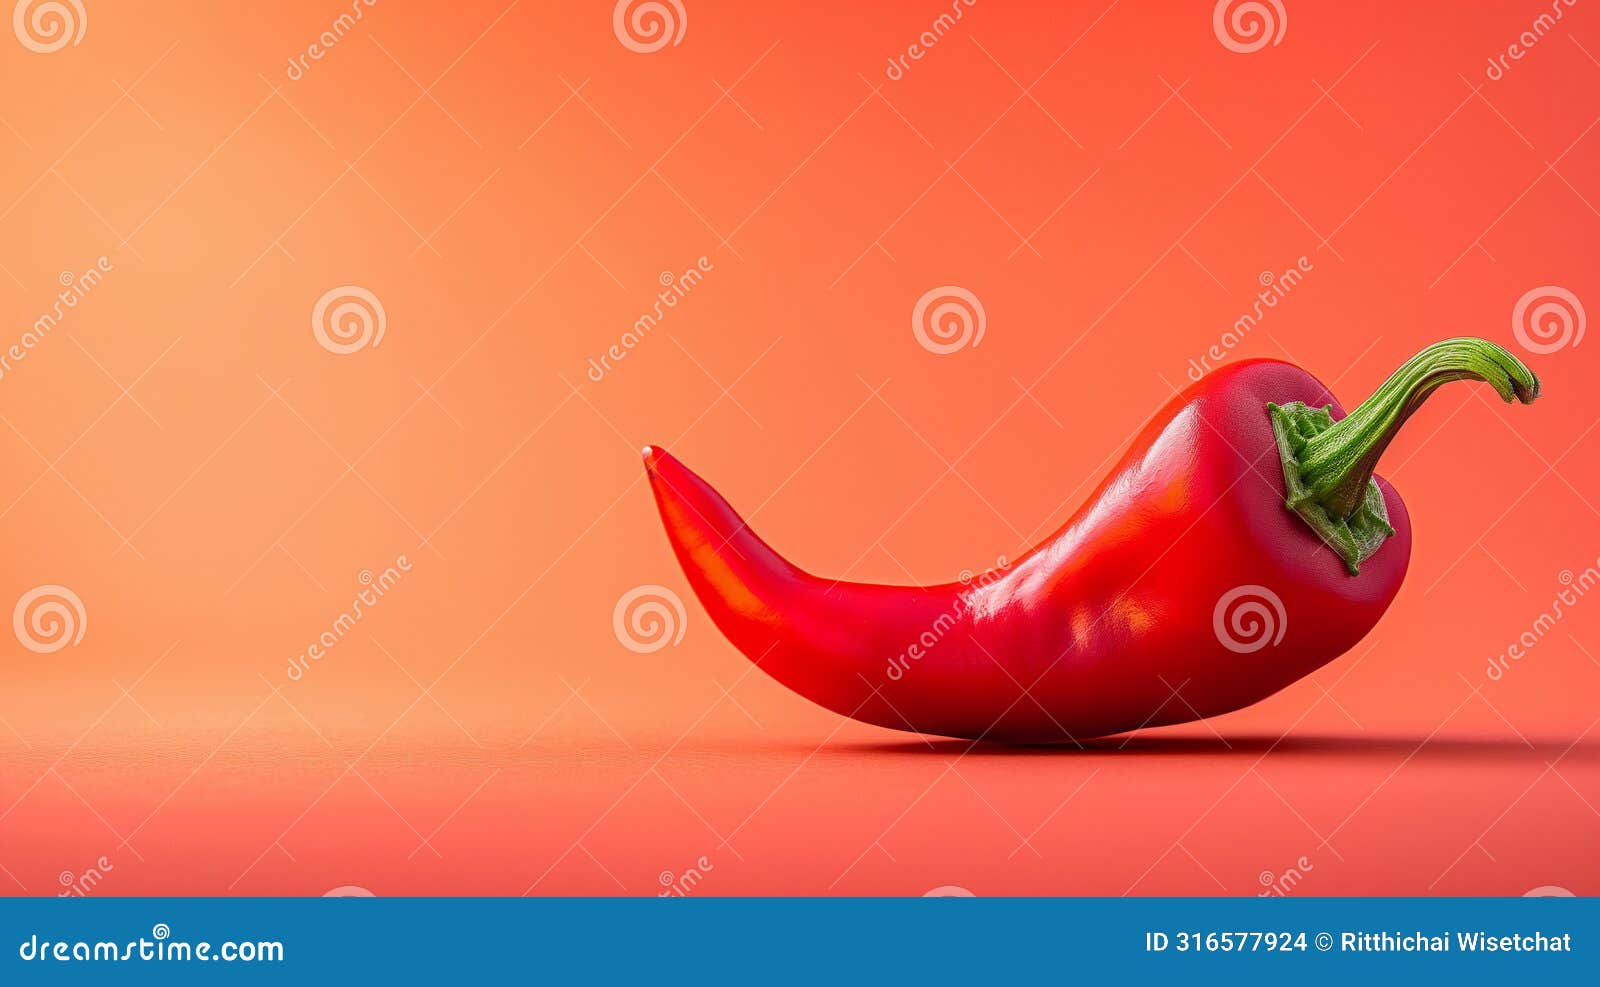 vibrant red chili pepper on a matching red background, positioned dynamically with a curved tail